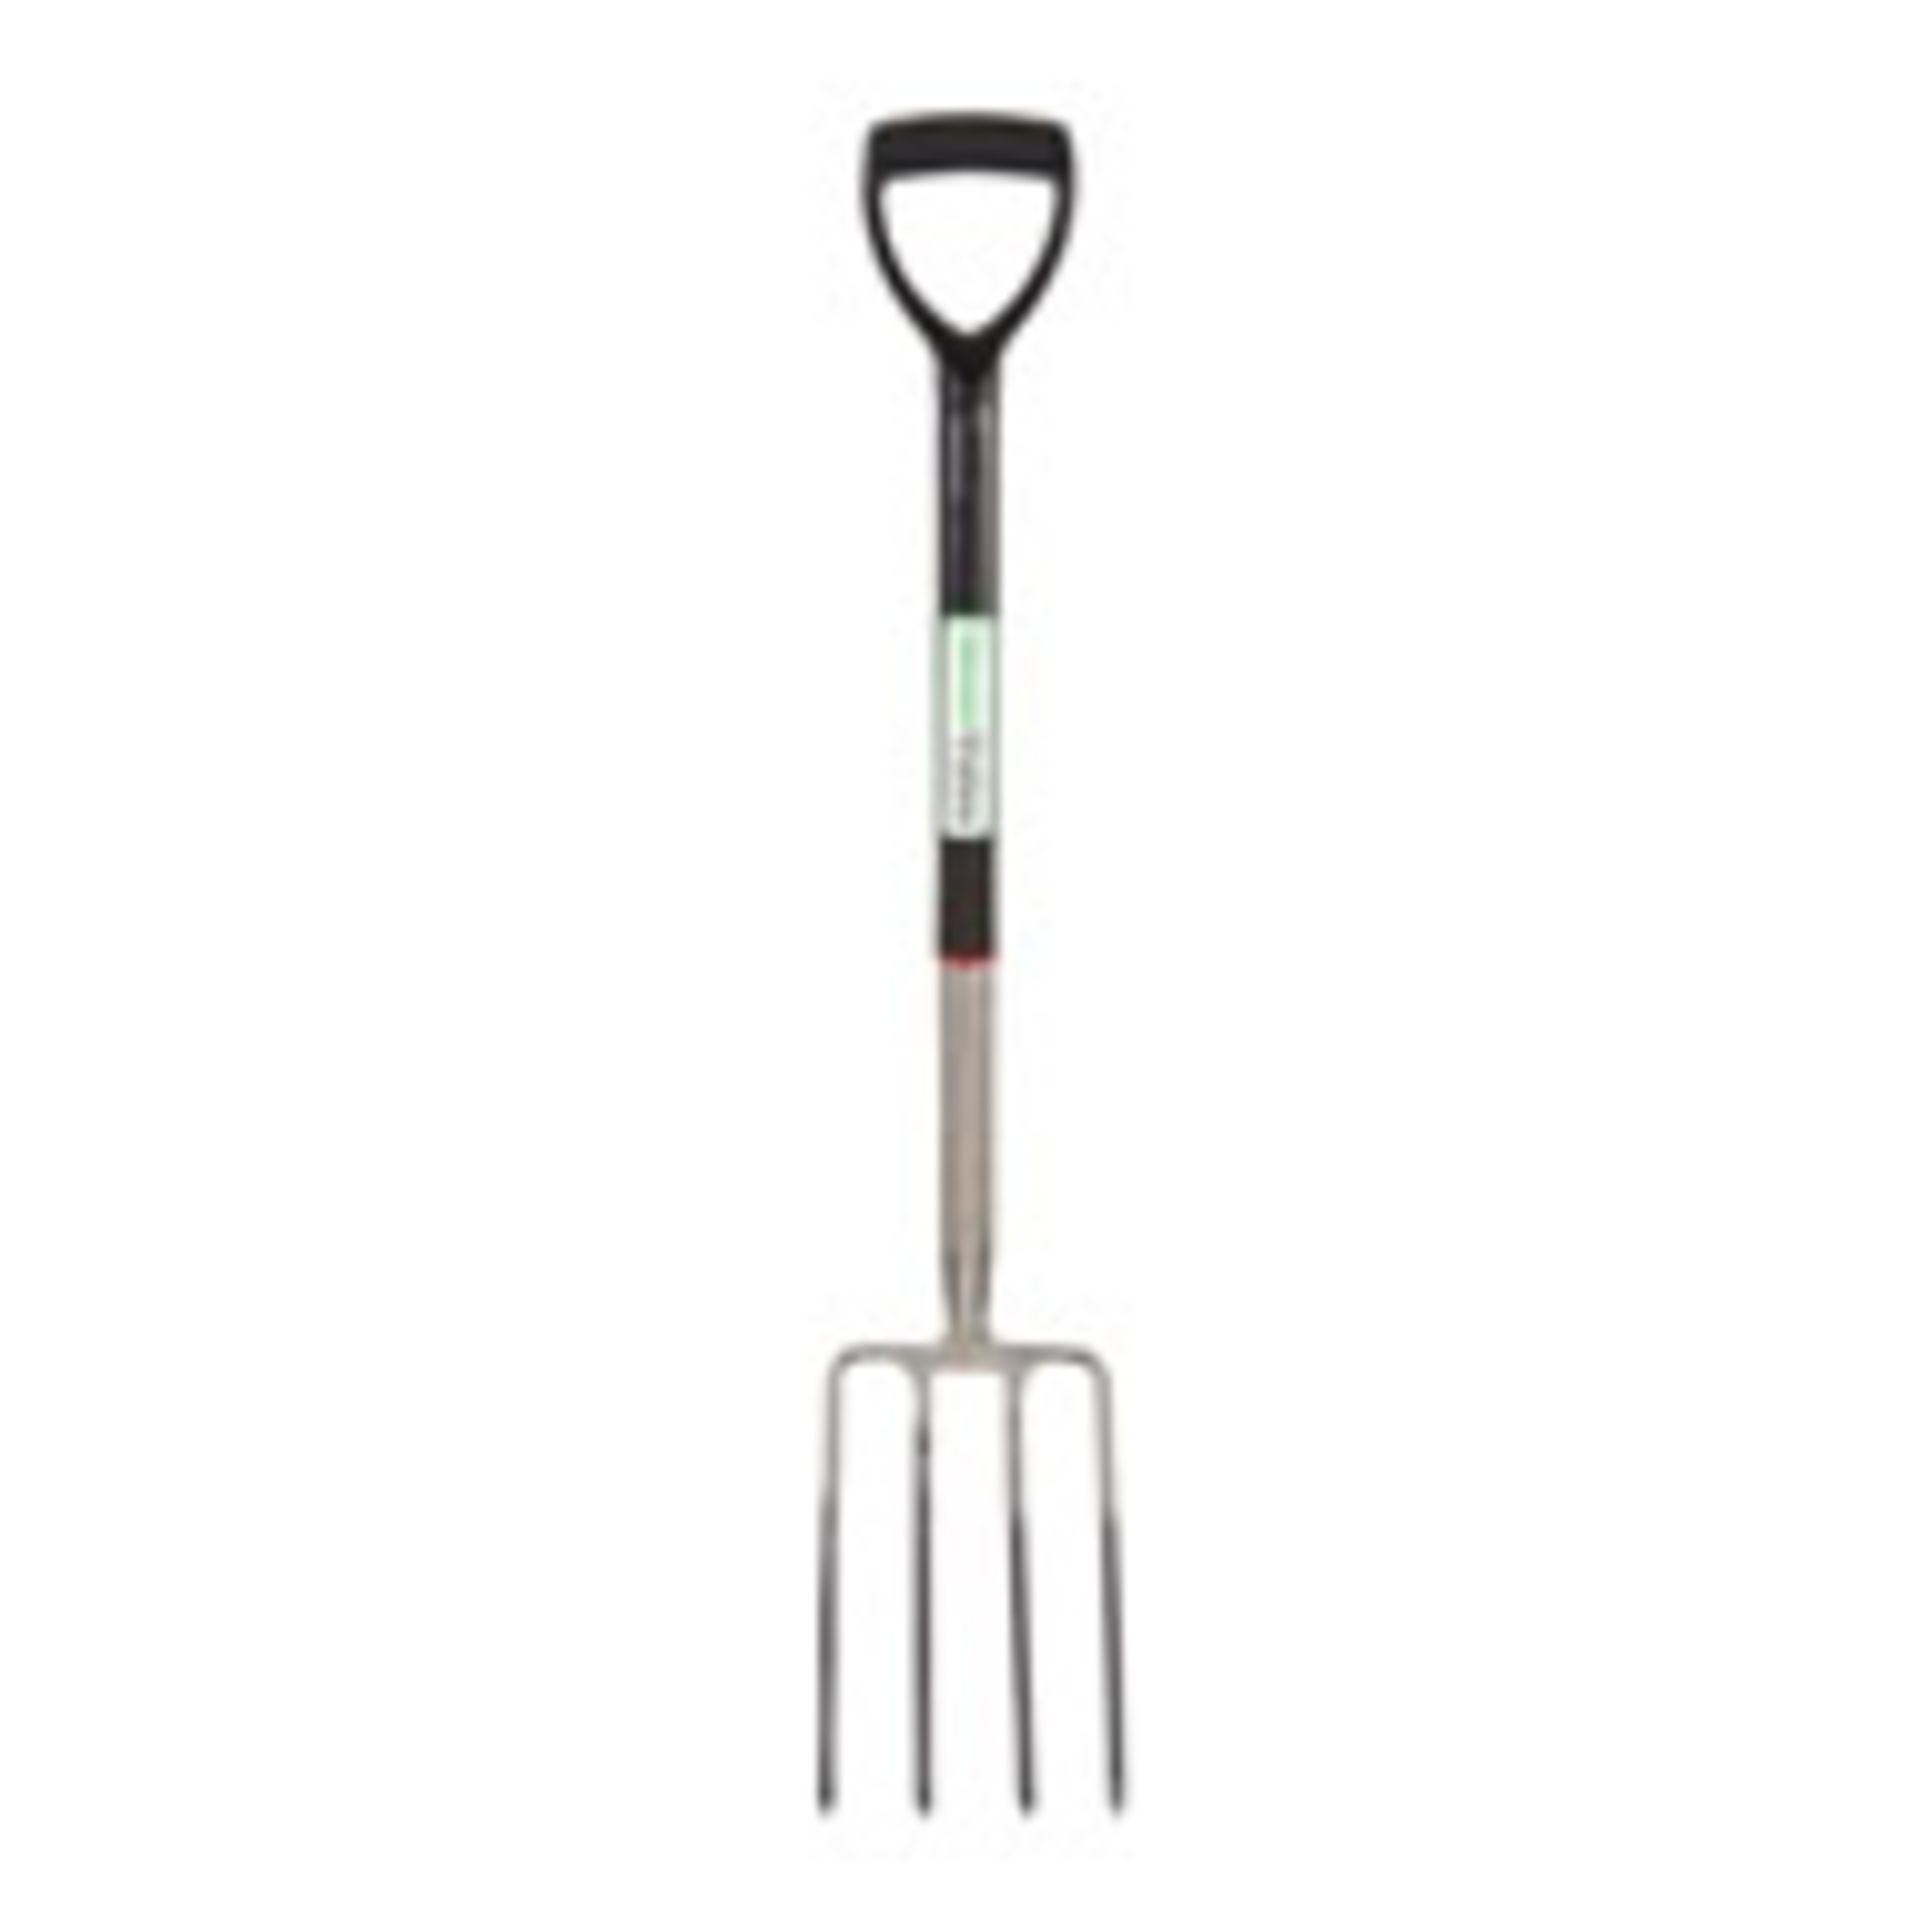 V Brand New Green Valley Stainless Steel Garden Fork With Poly Hilt ISPú39.99